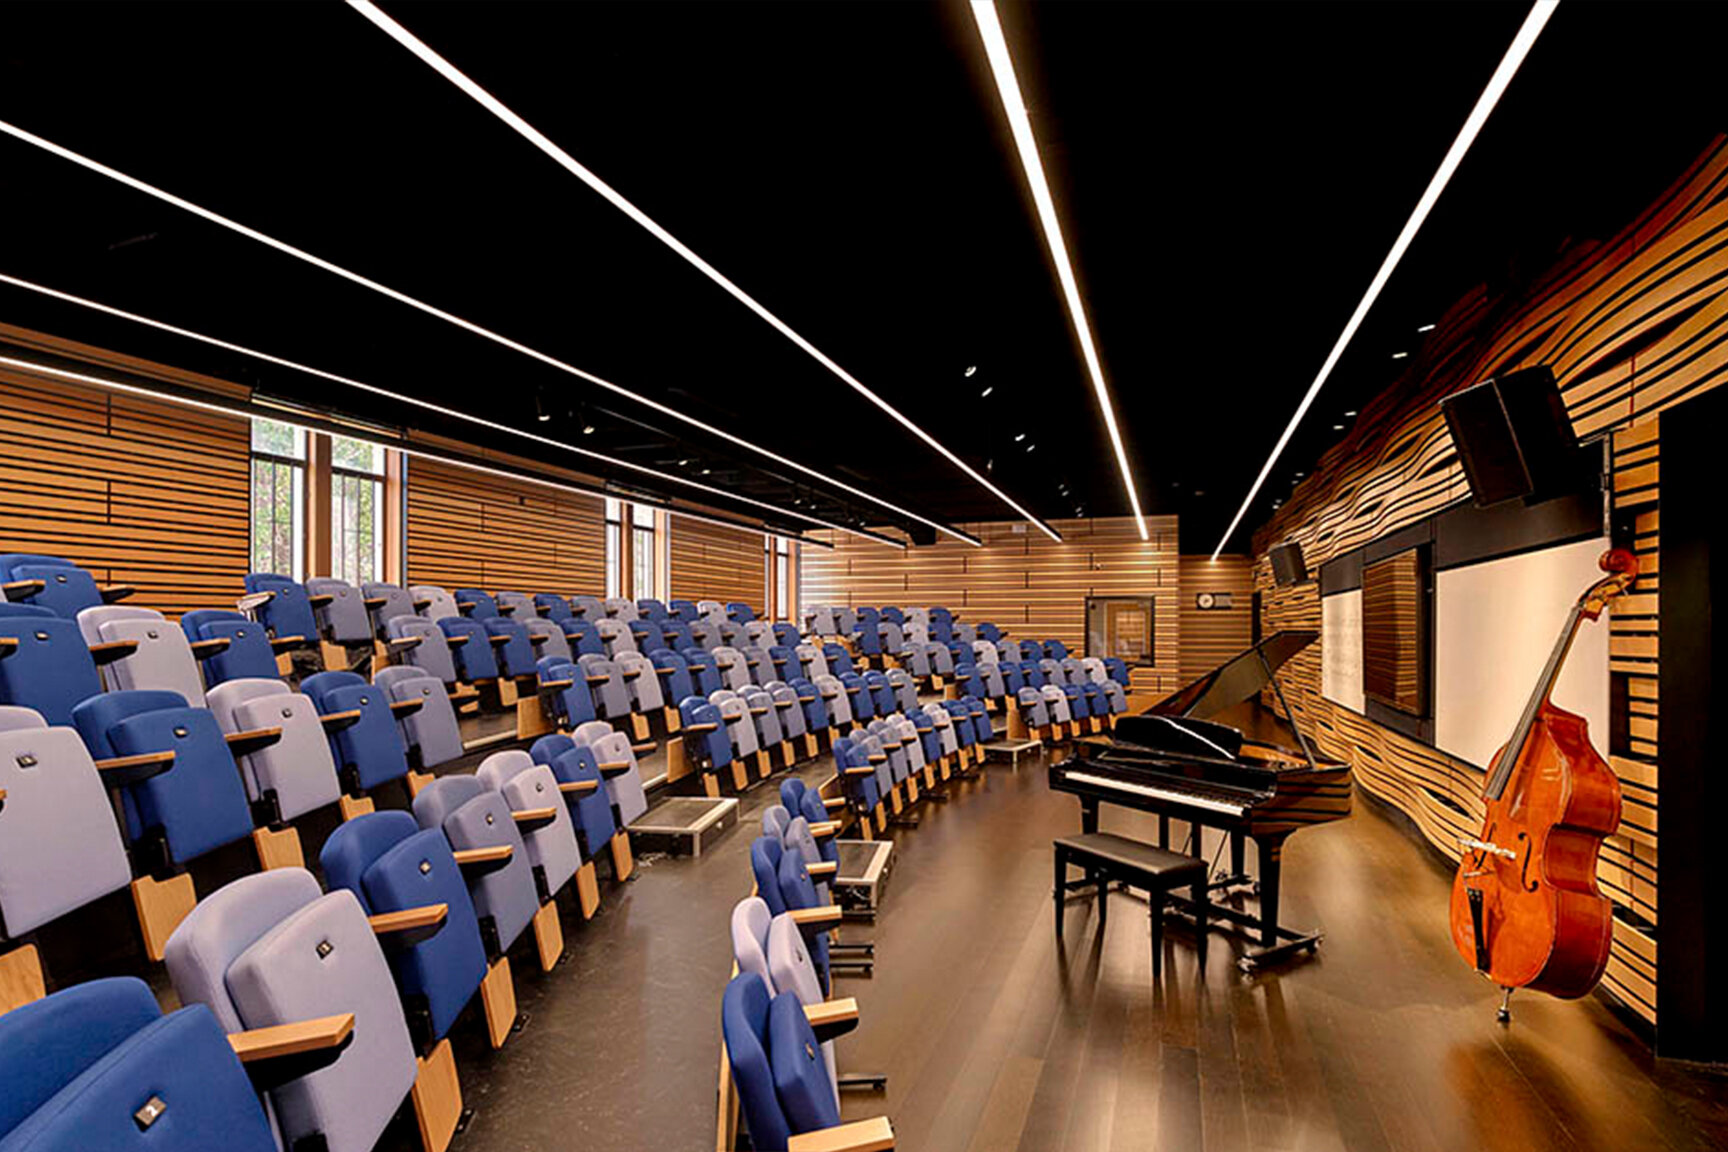 01-SHCP-IntersticeArchitects-opposite-seats-small.jpg